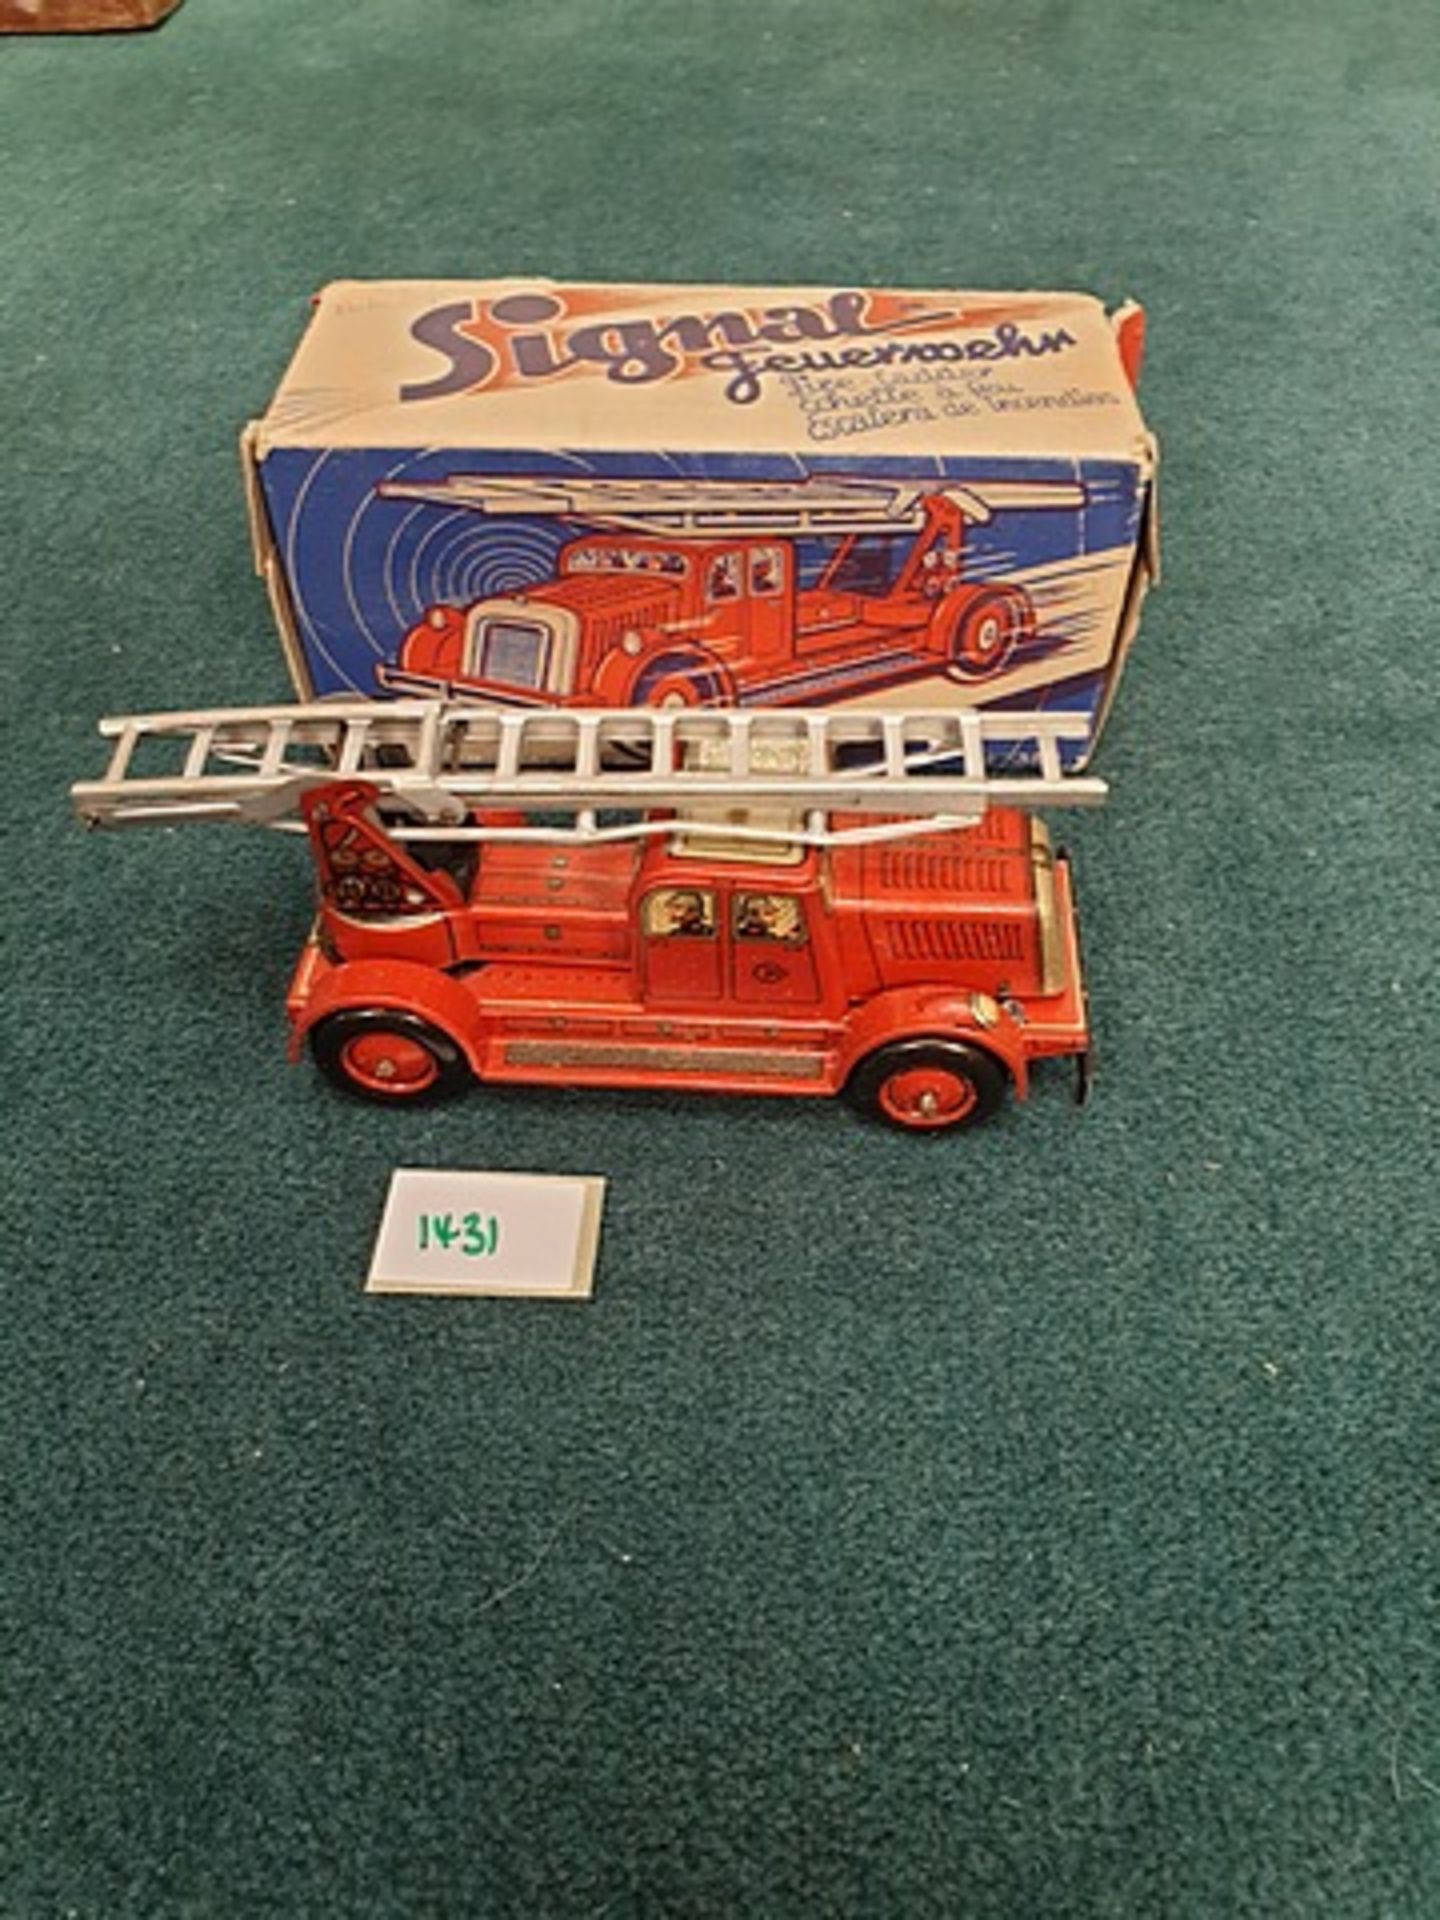 CKO #350 Signal Tin Lithographed Wind-Up Fire Engine Ladder Truck Complete With Box - Image 2 of 2